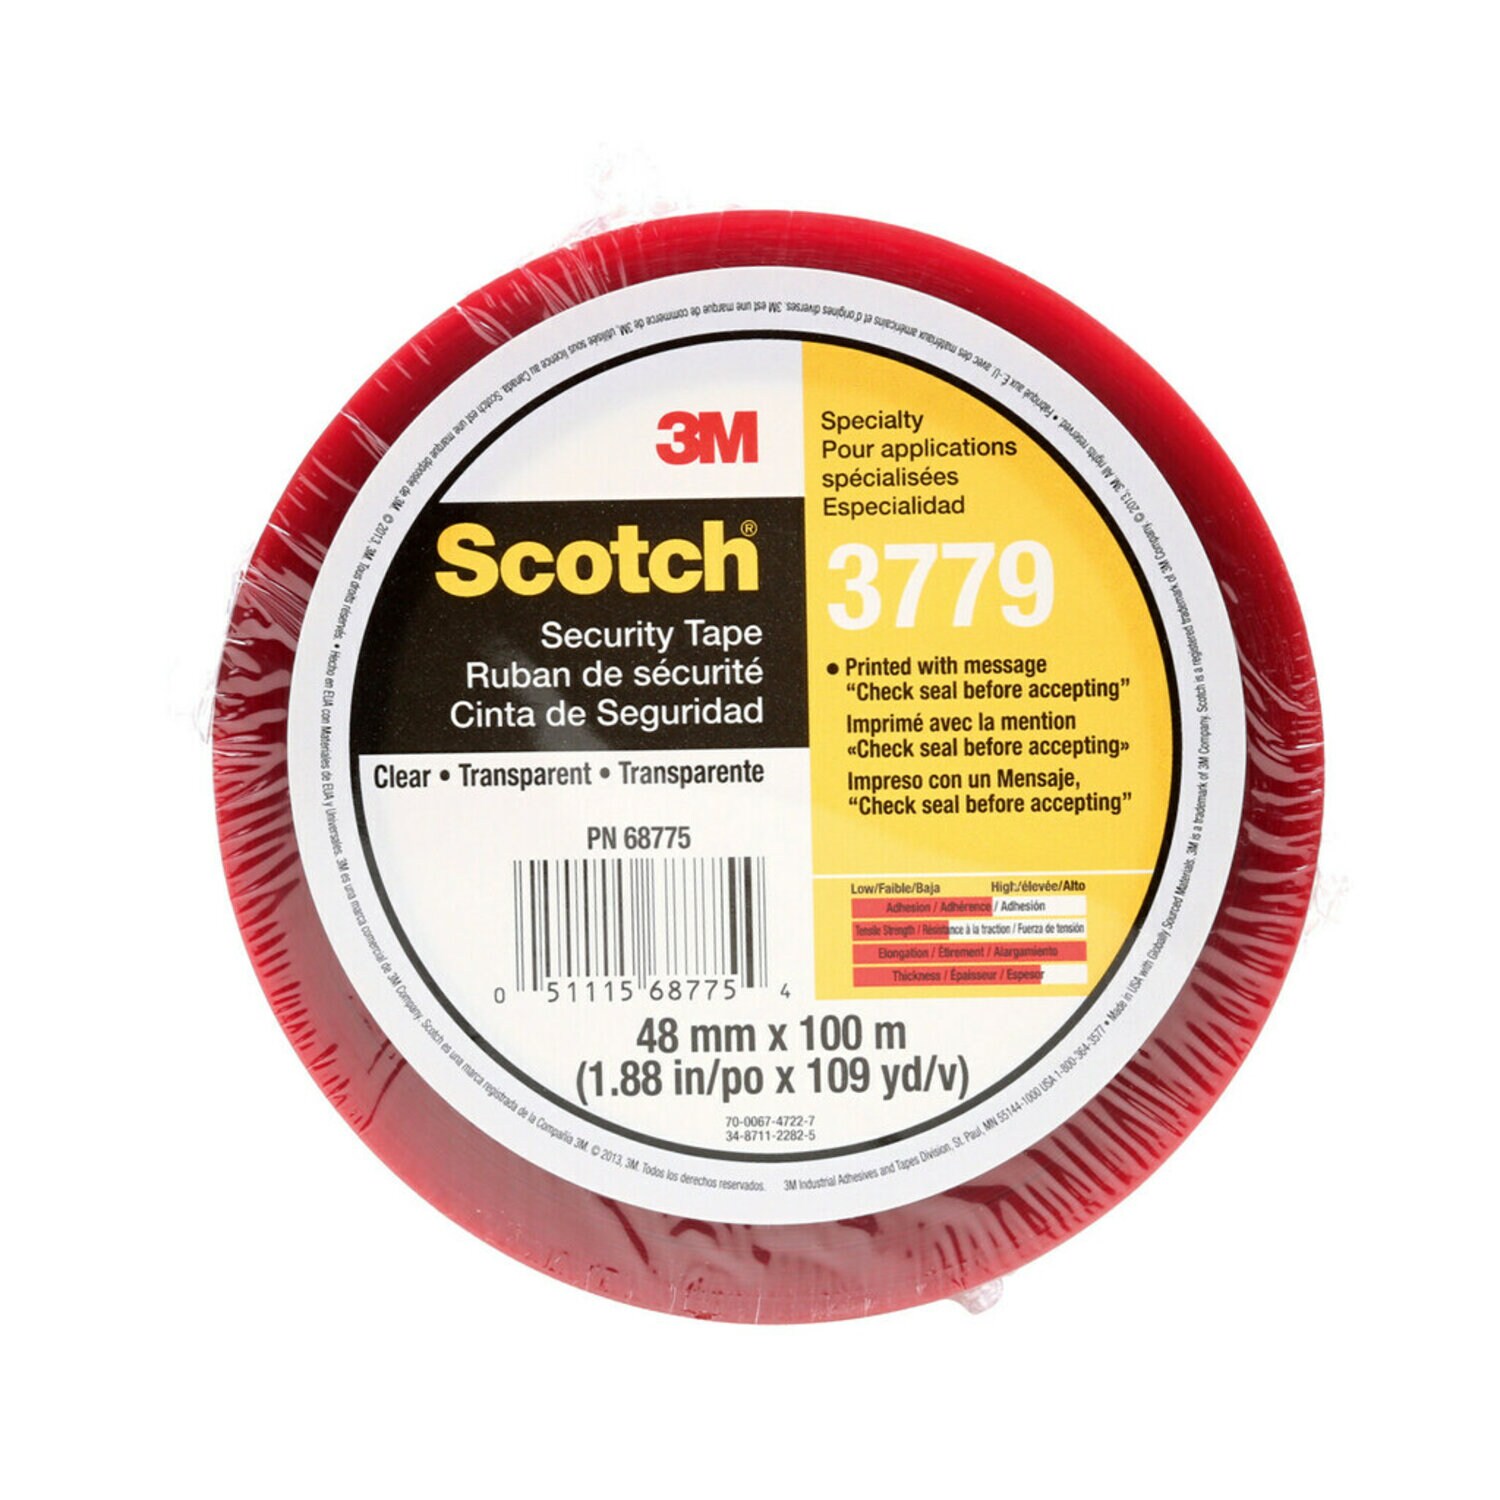 7000123942 - Scotch Security Message Box Sealing Tape 3779, Clear, 48 mm x 100 m,
36/Case